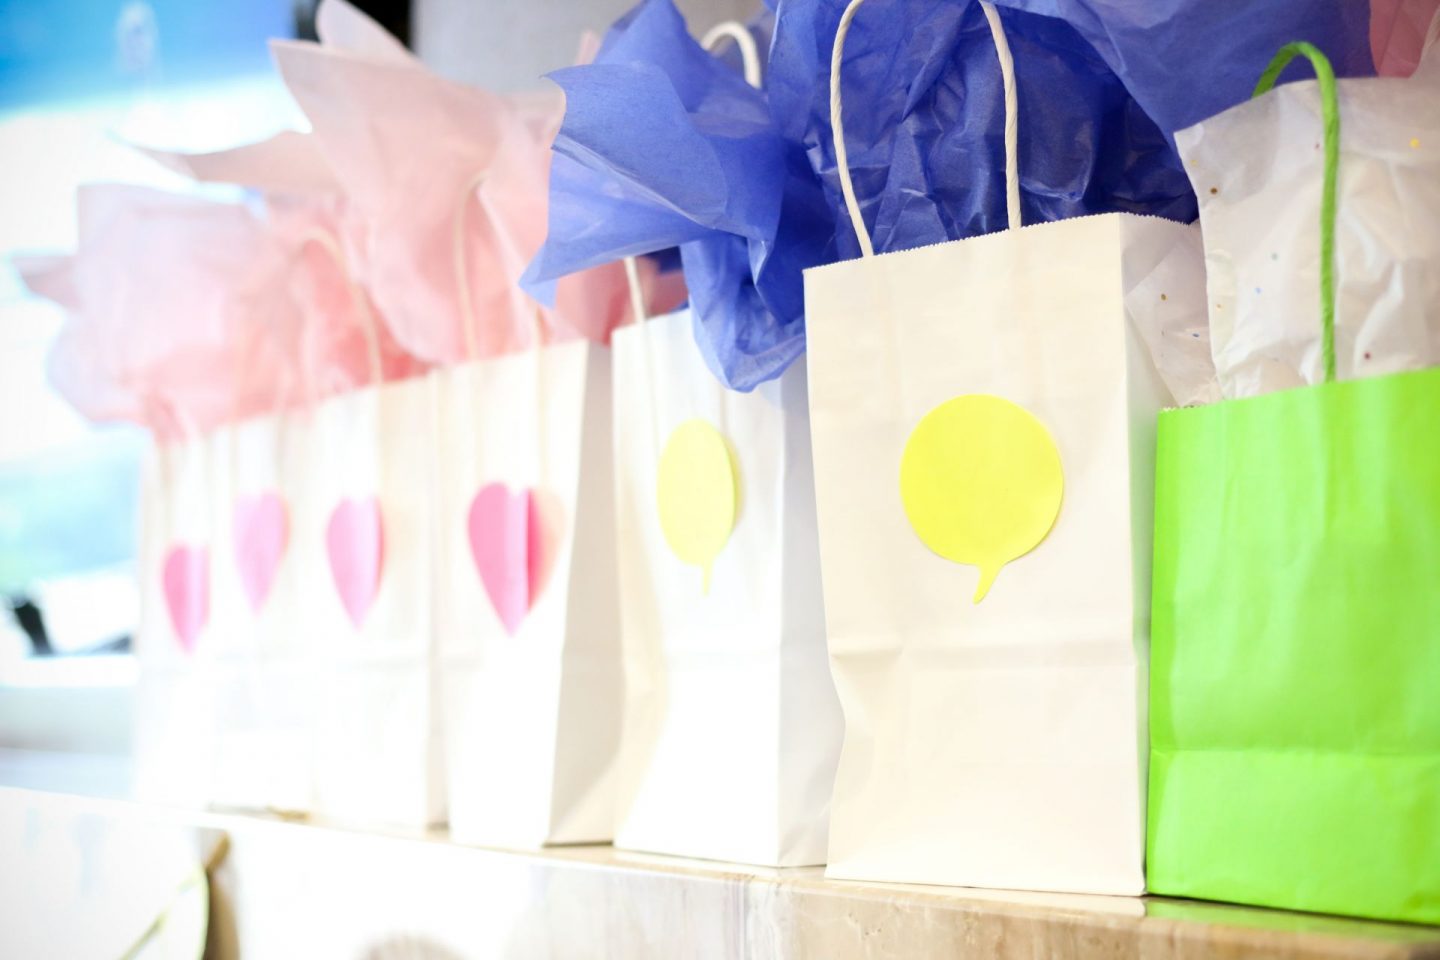 Party bags ready to be given to children at a party.